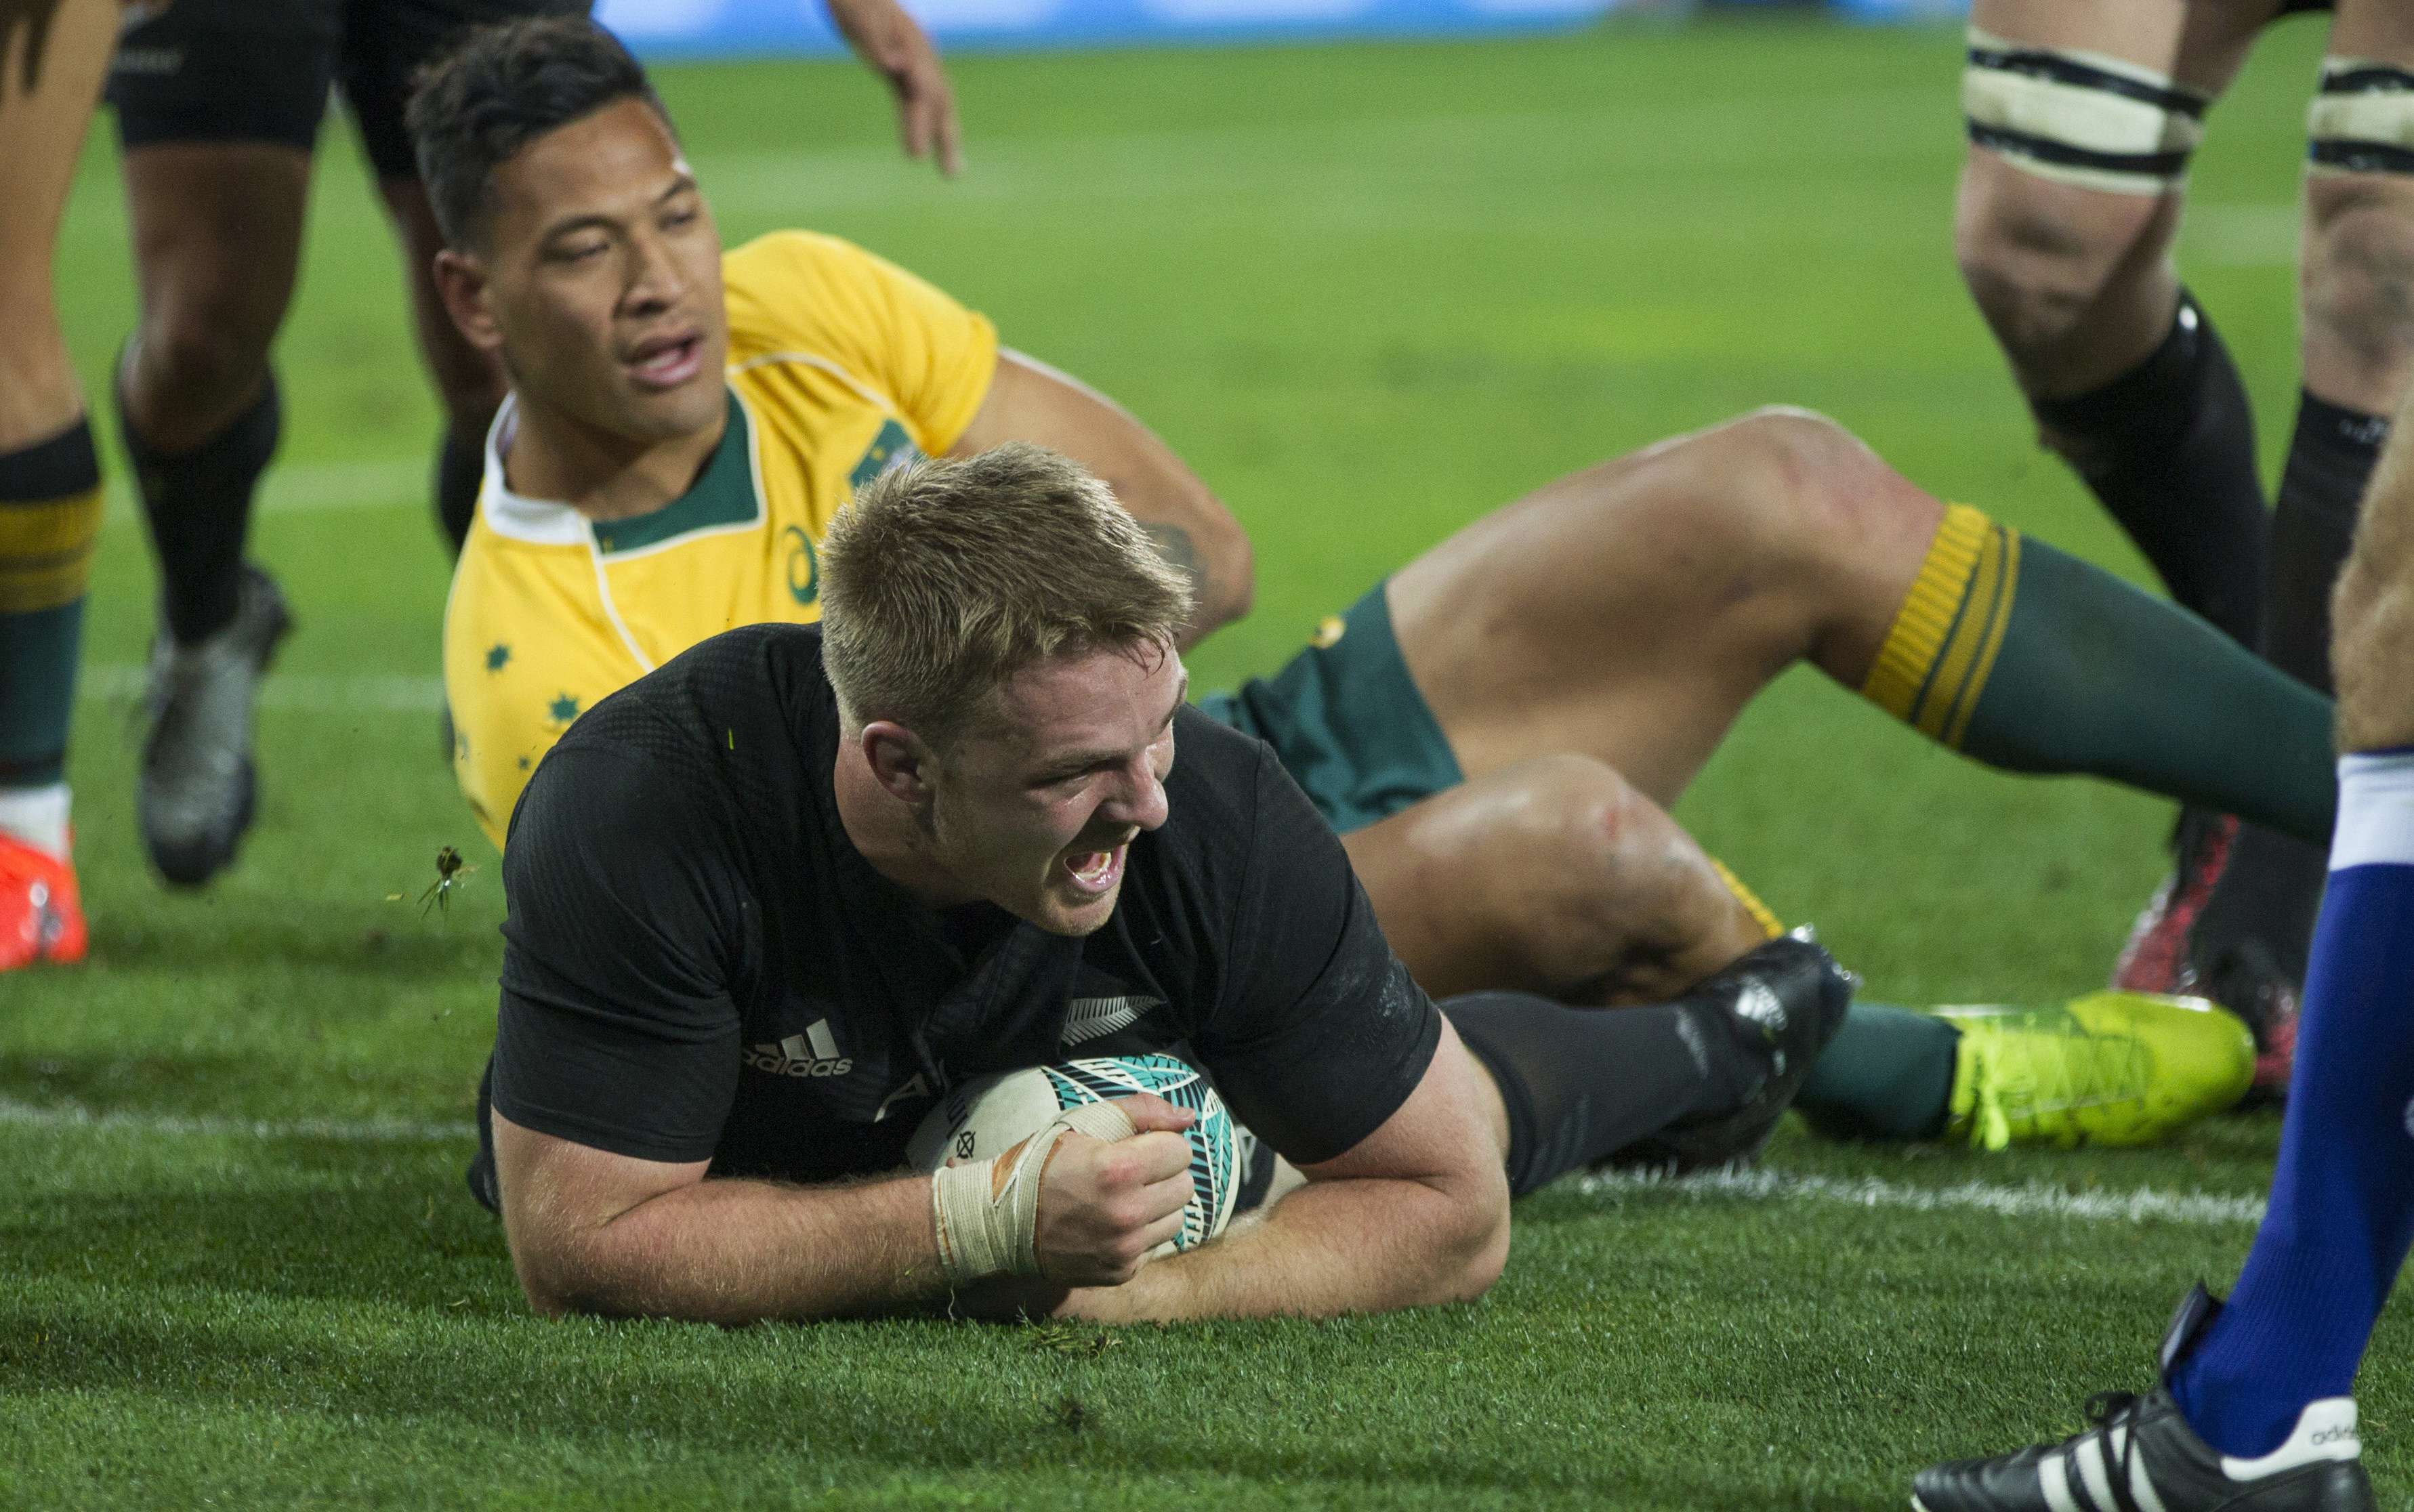 All Blacks flanker Sam Cane scores a try as New Zealand defeat an Australian side he says lacked focus. Photo: AP